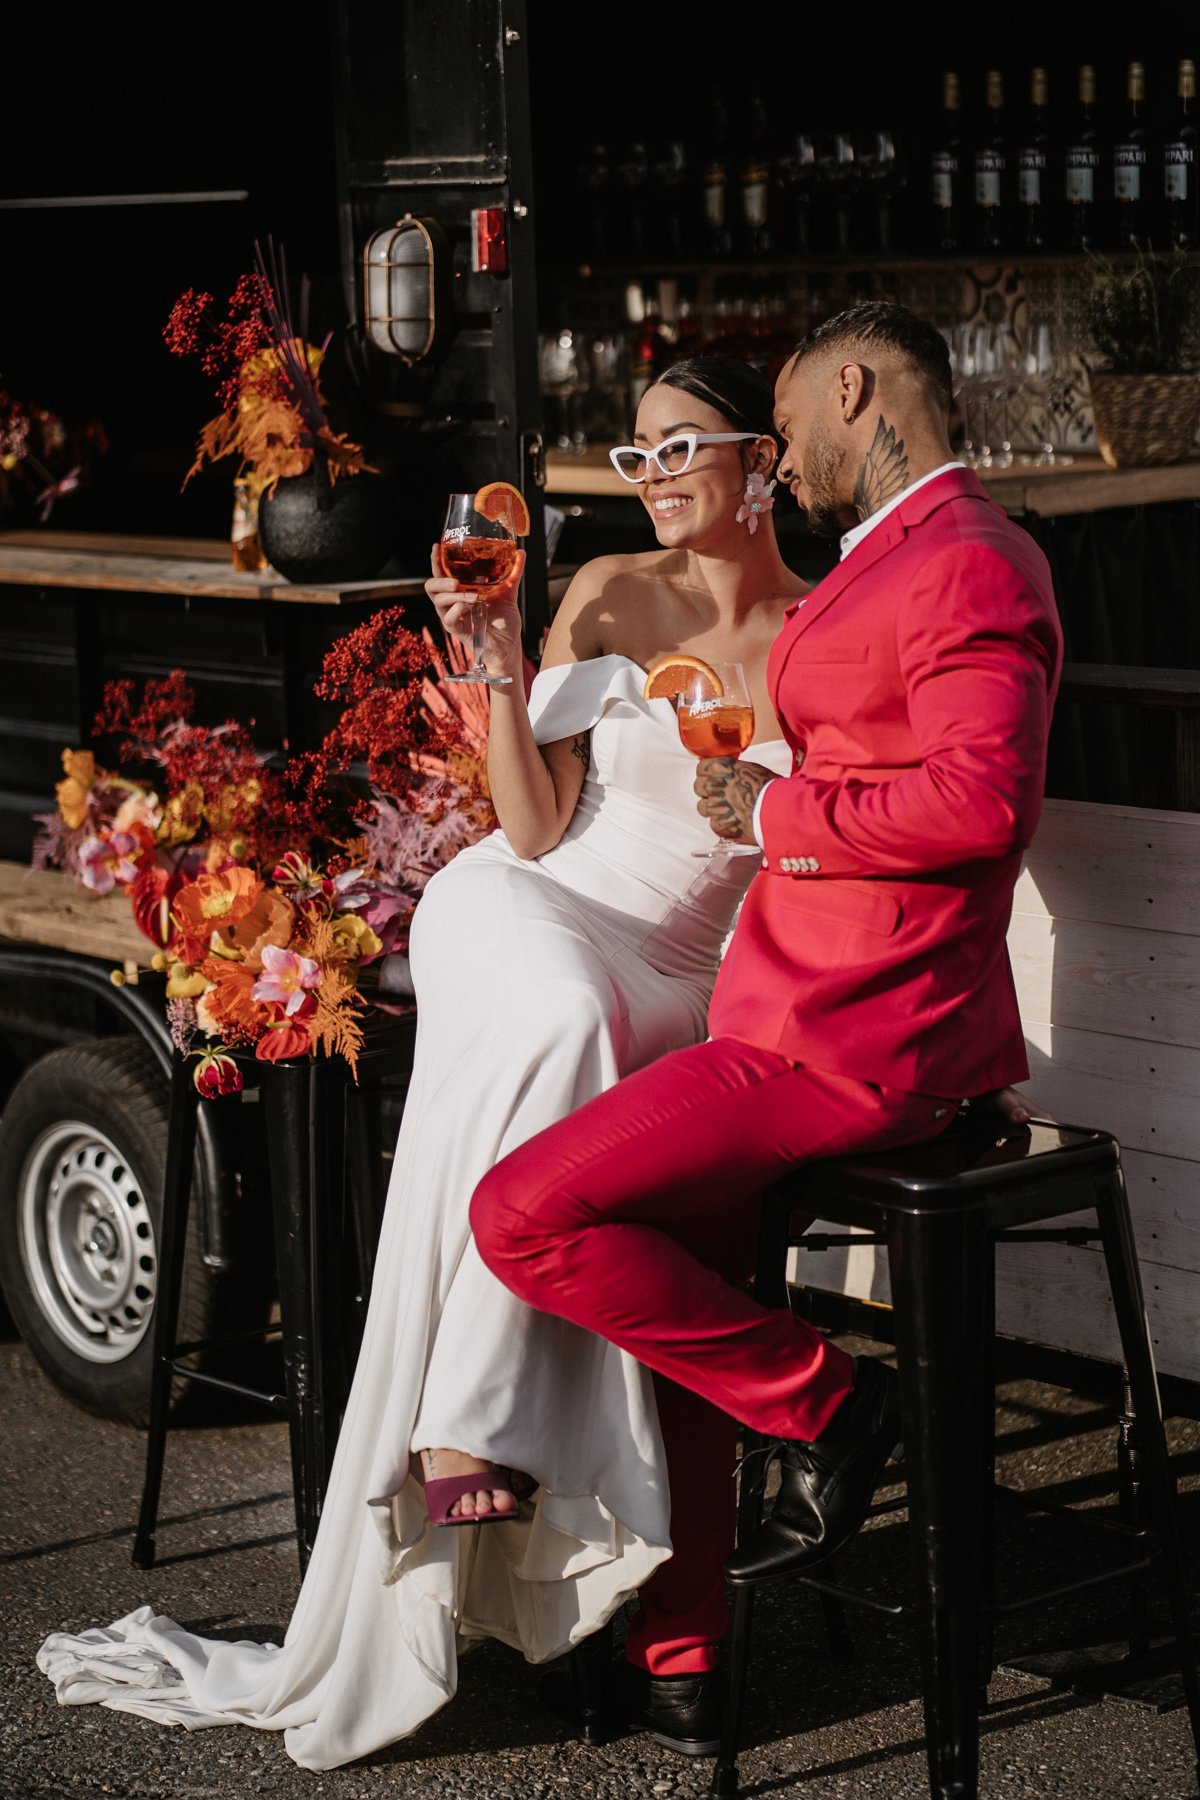 Bold Colors for a Bold Couple at this Bright and Colorful Inspo Shoot